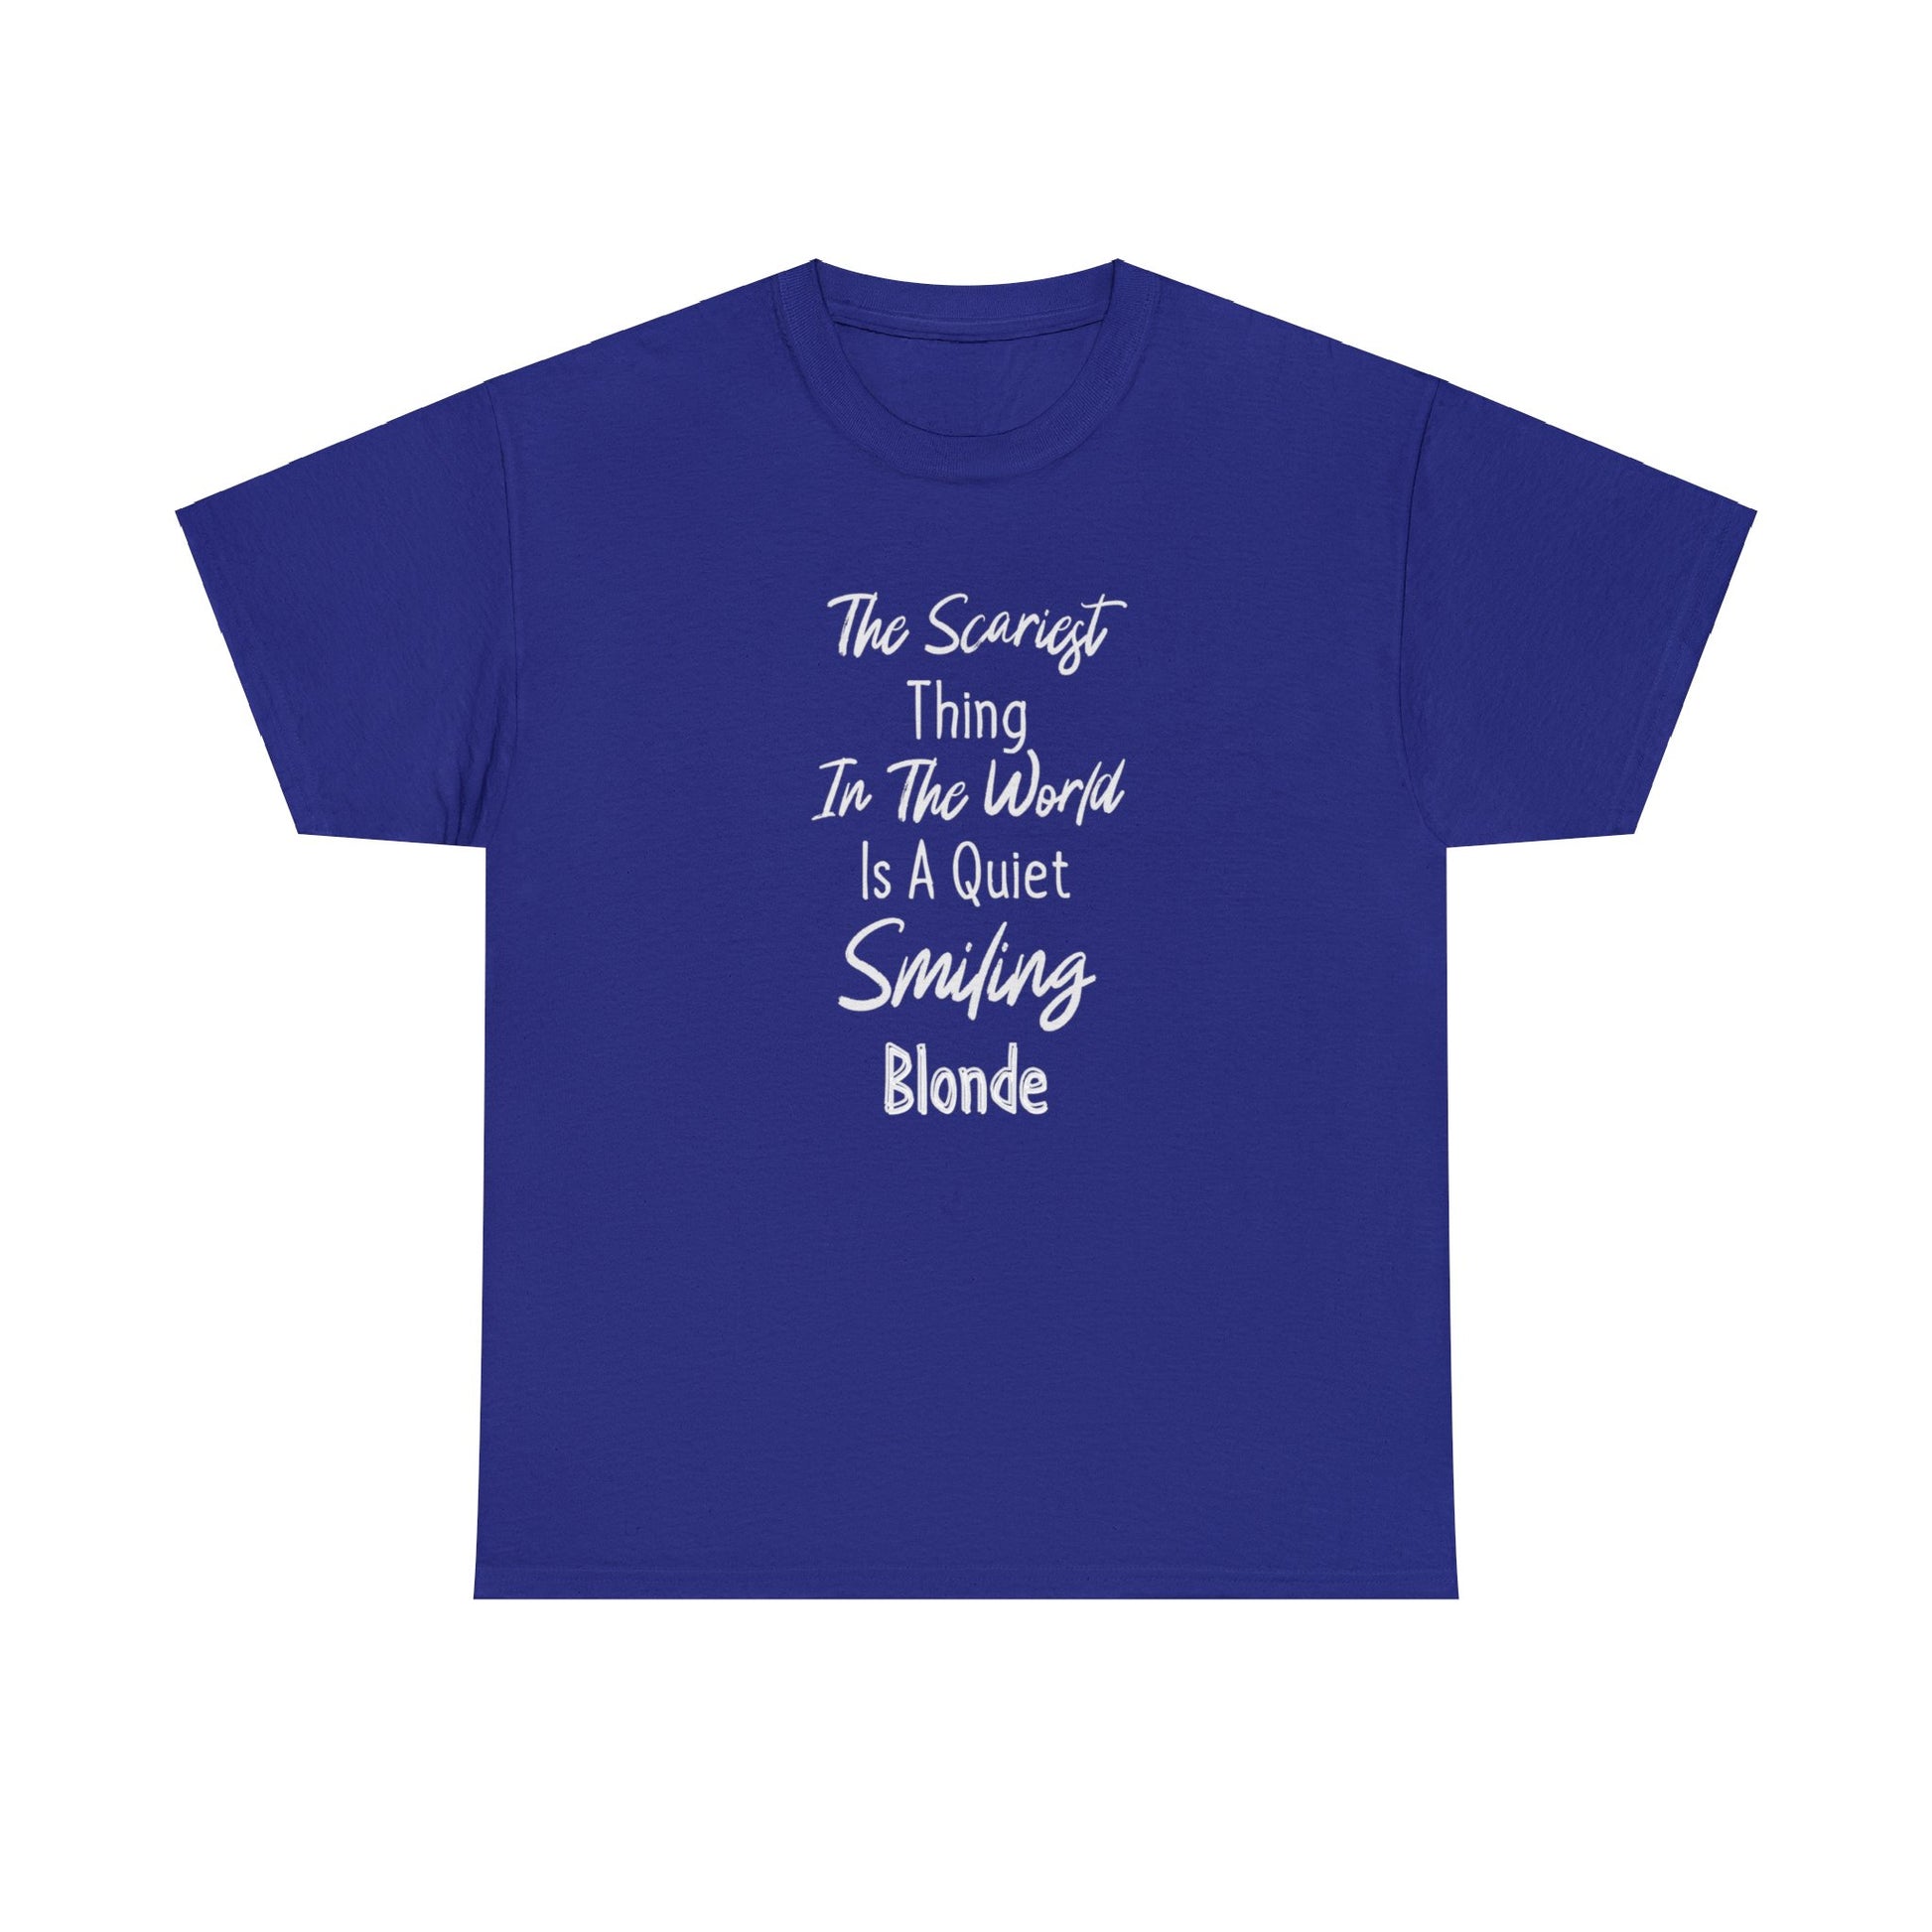 "Scary Blonde" T-Shirt - Weave Got Gifts - Unique Gifts You Won’t Find Anywhere Else!